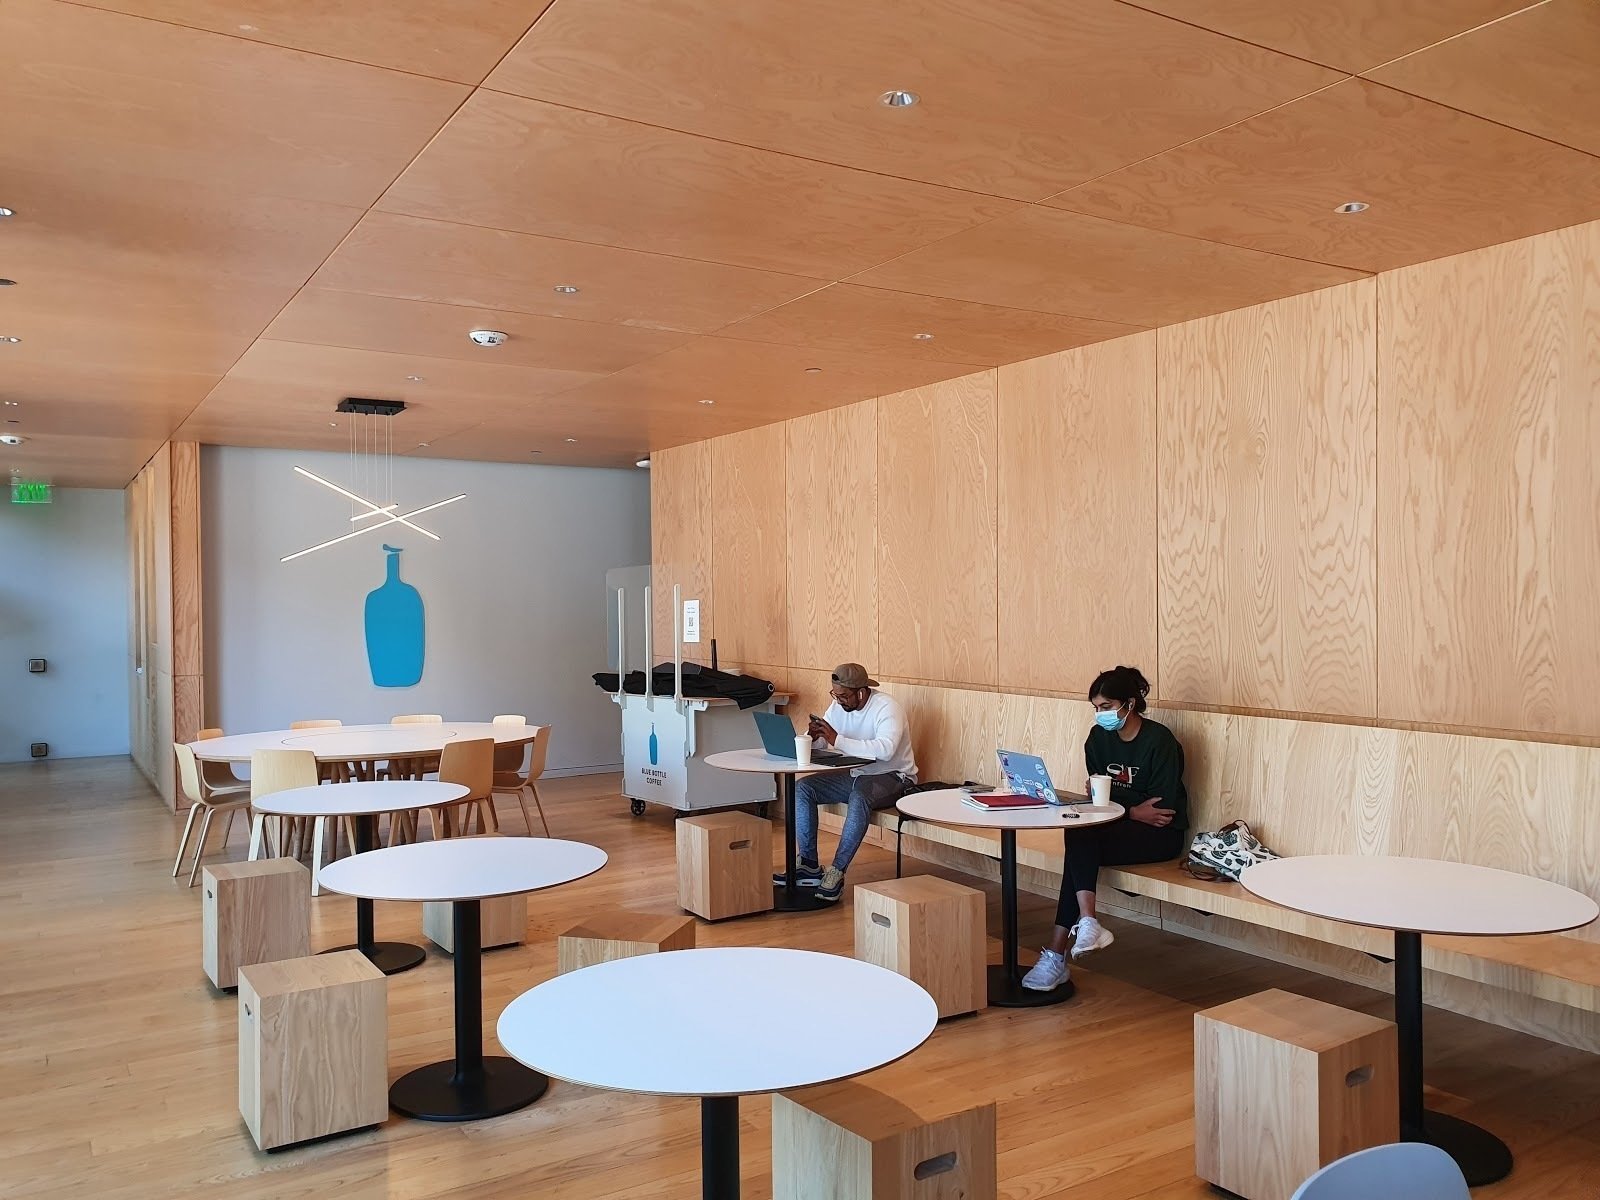 <span class="translation_missing" title="translation missing: en.meta.location_title, location_name: Blue Bottle Coffee, city: San Mateo">Location Title</span>